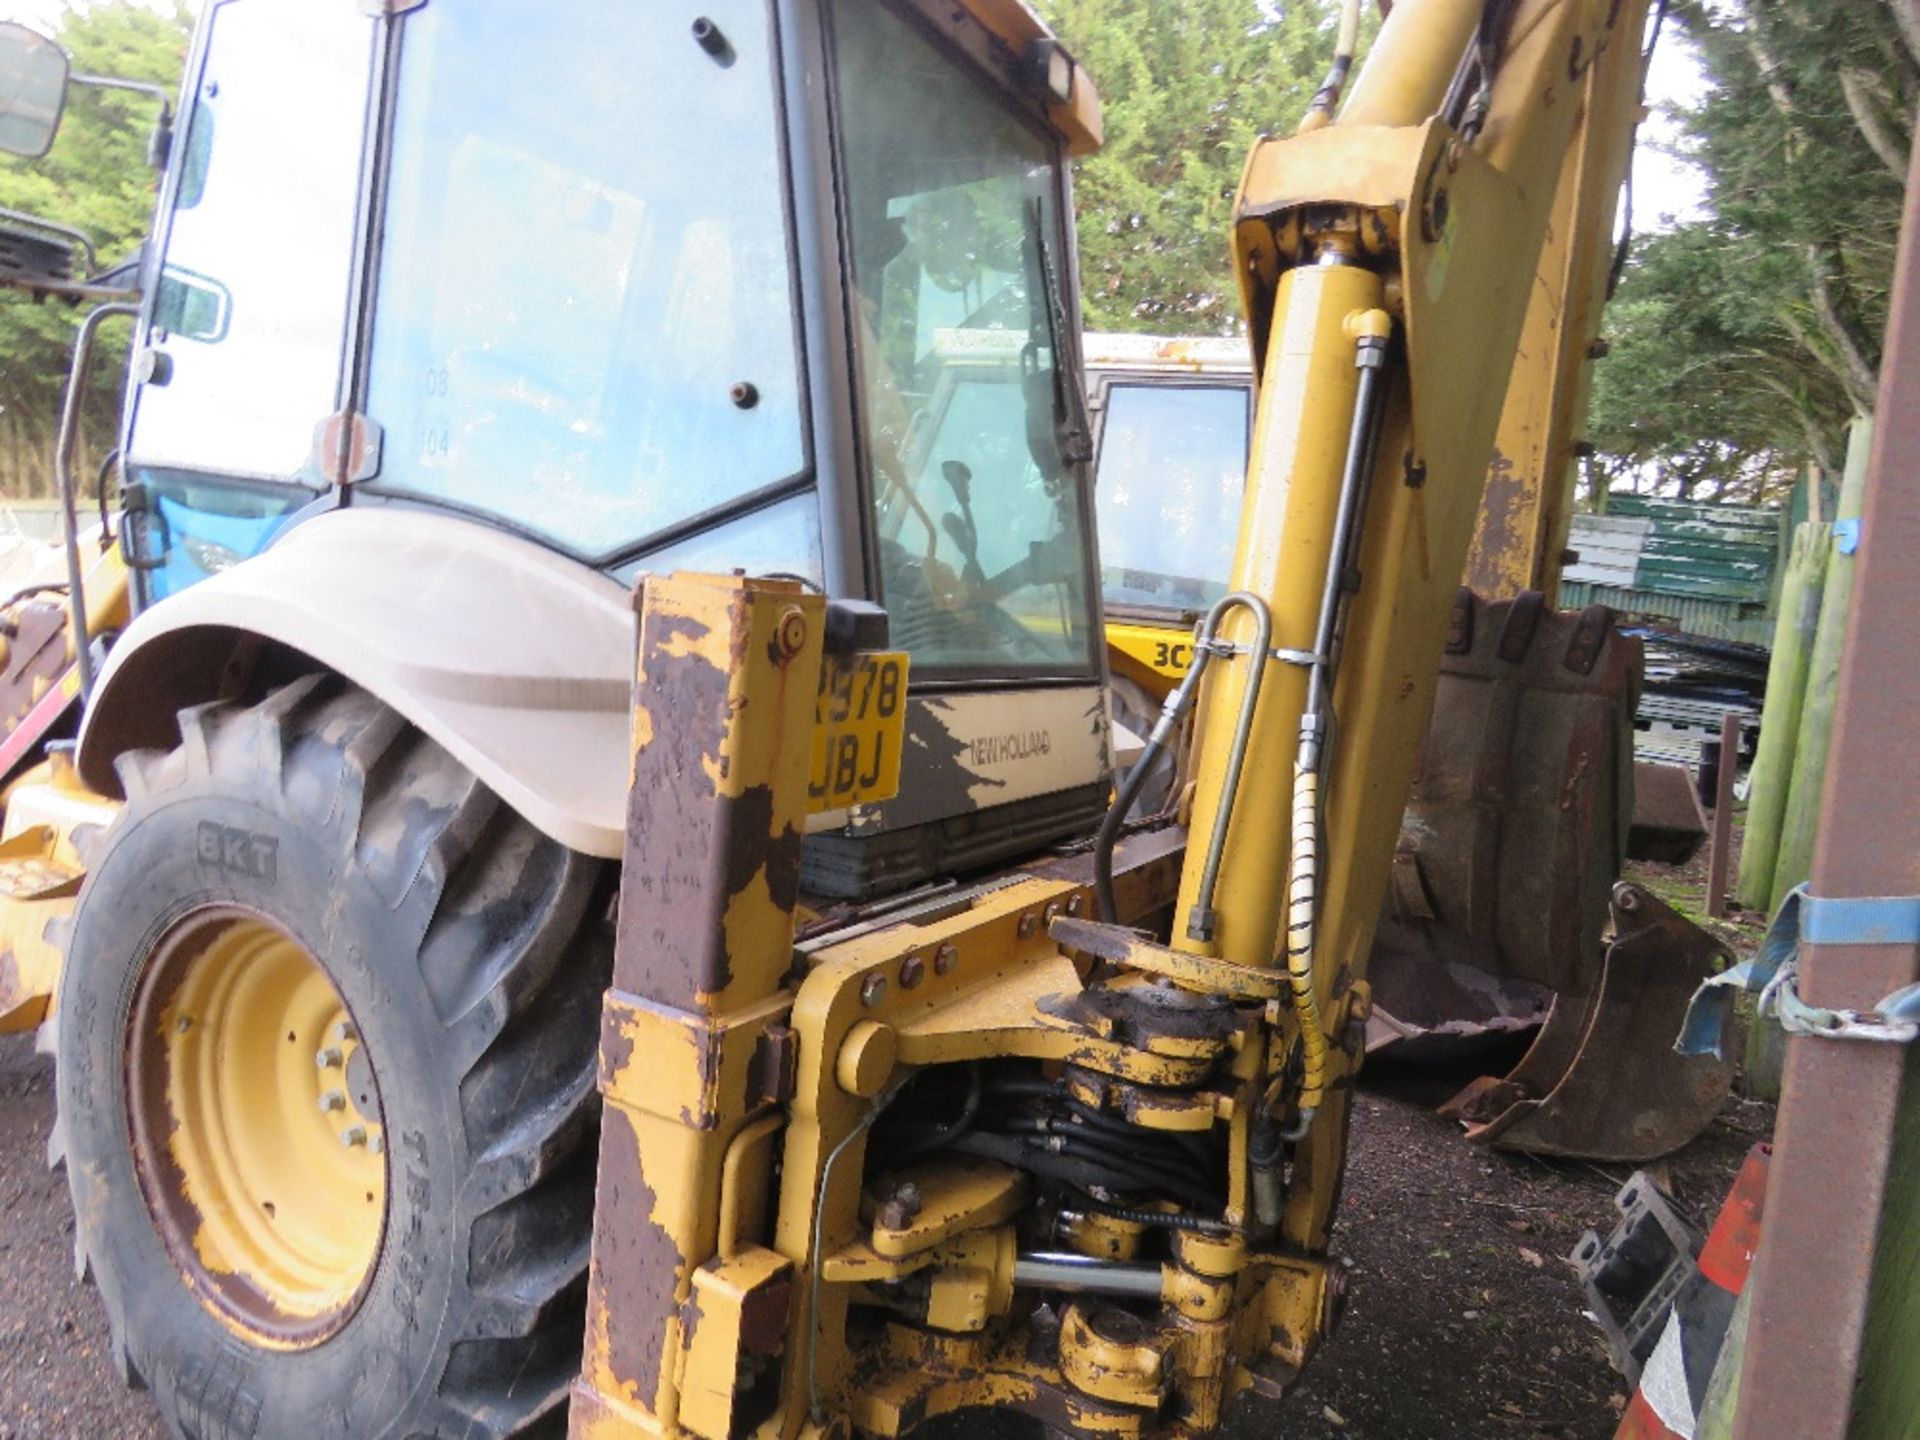 NEW HOLLAND 85 BACKHOE LOADER, REG: R978 JBJ. 8542 REC HOURS. WITH 4IN1 BUCKET AND ONE REAR BUCKET. - Image 9 of 10